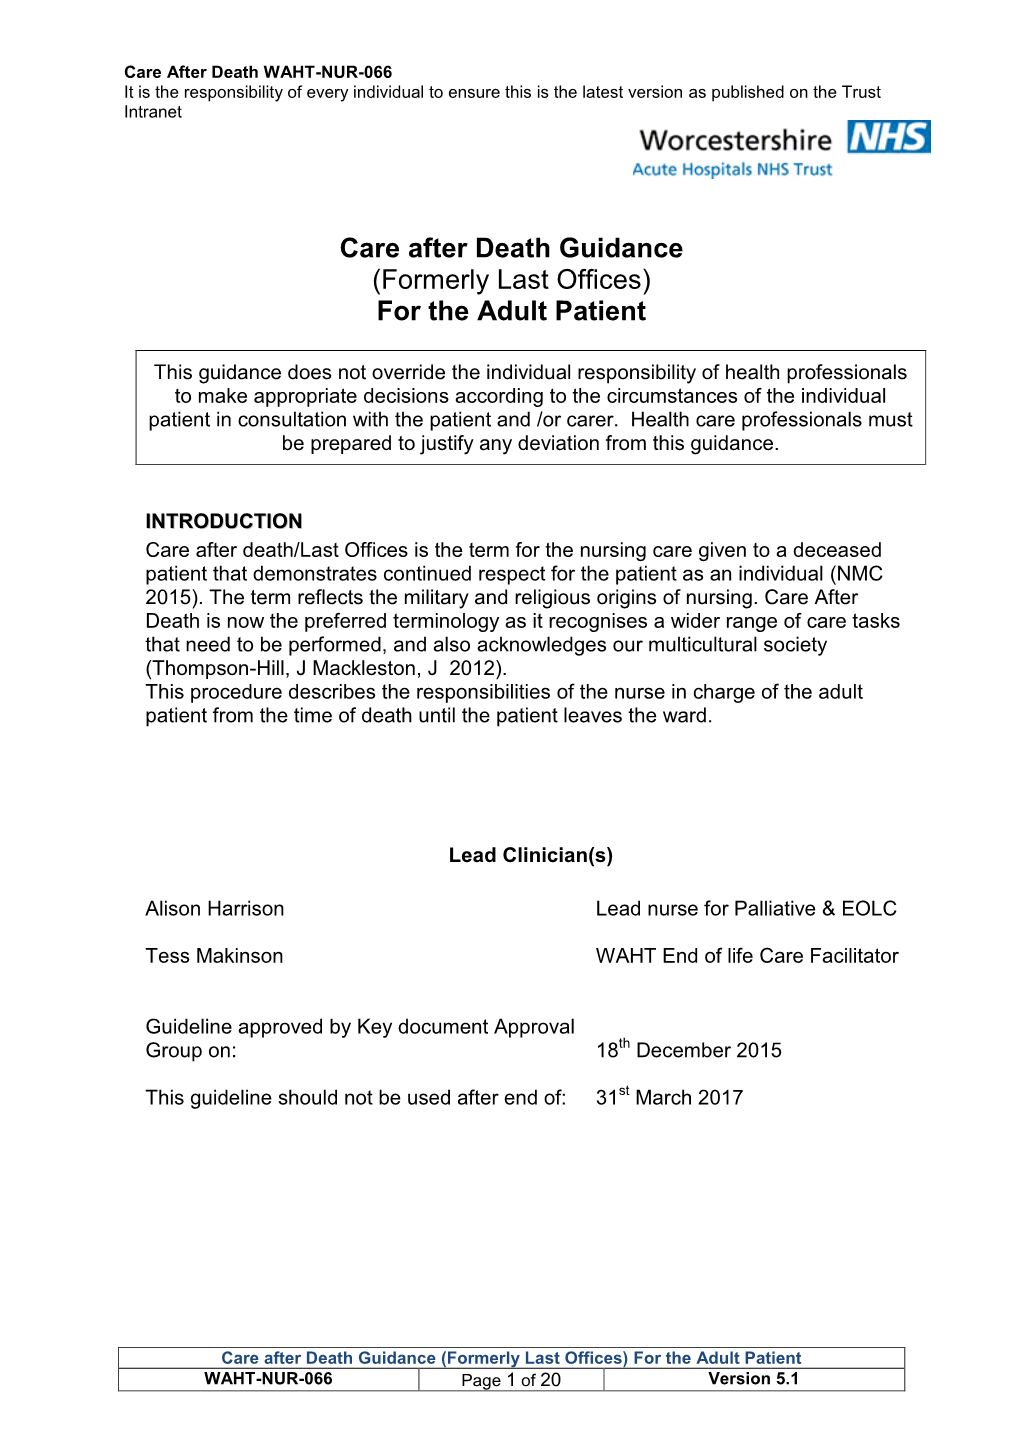 Care After Death Guidance (Formerly Last Offices) for the Adult Patient